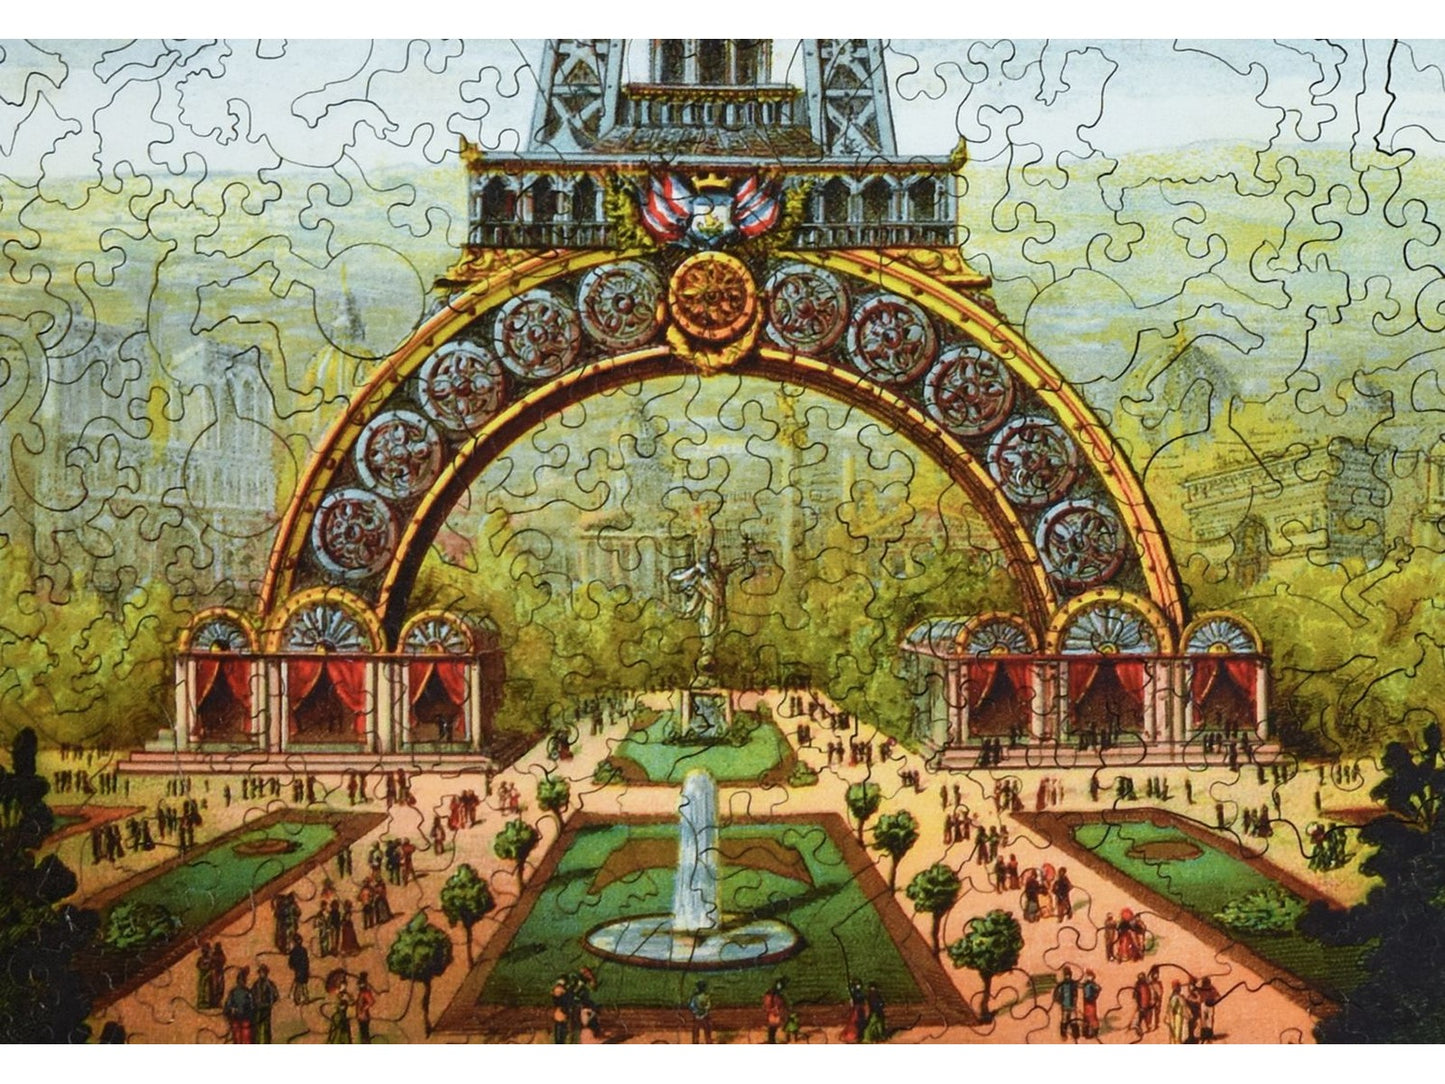 A closeup of the front of the puzzle, Exposition Universelle de 1889.